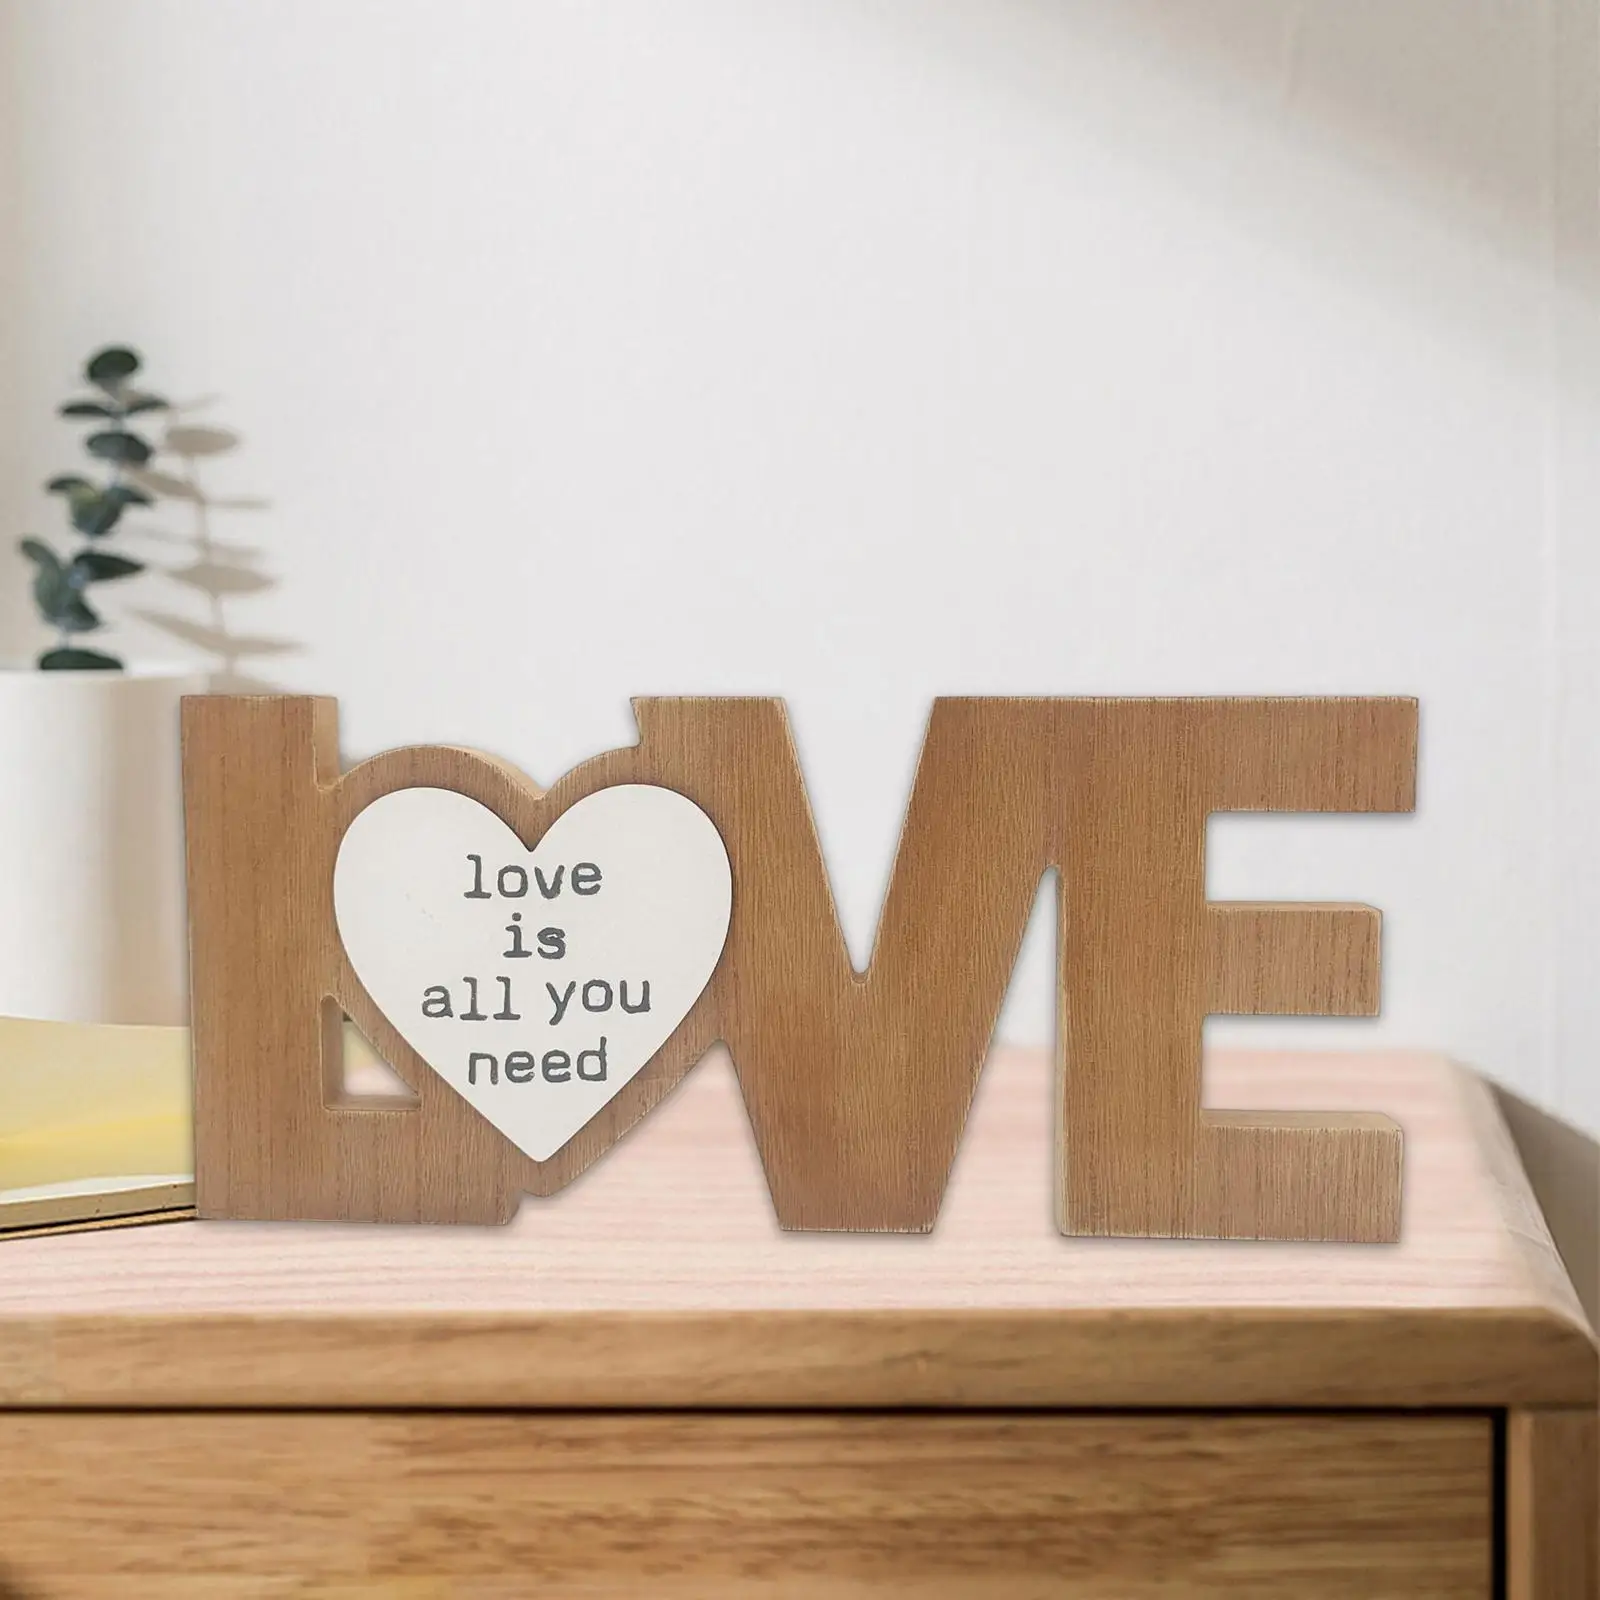 Rustic Wooden Love Words Decorative Sign Freestanding Photo Props Engagement Decor